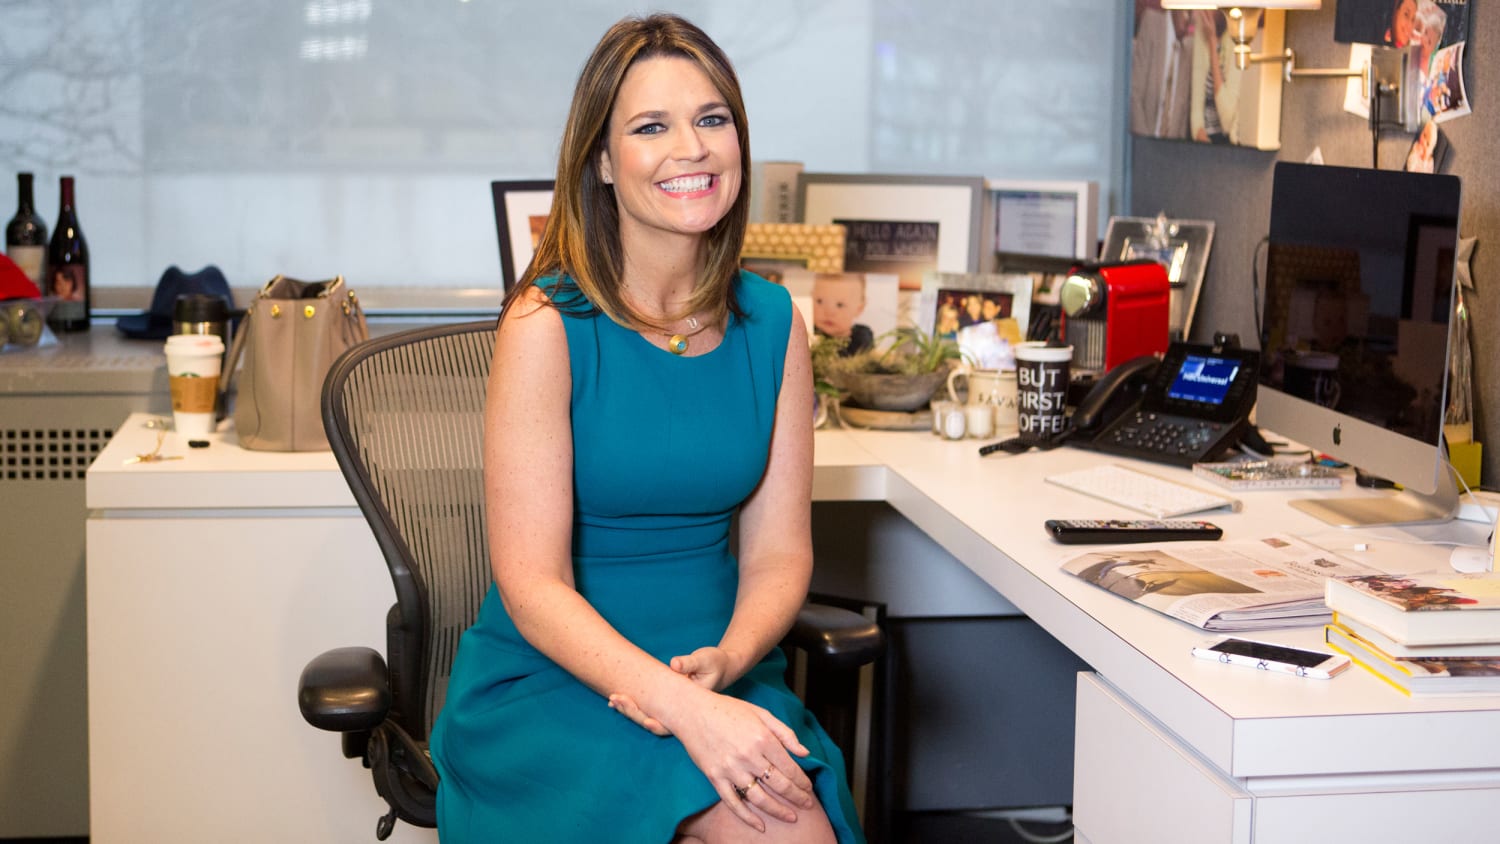 Savannah Guthrie welcomes you inside her TODAY Show dressing room.